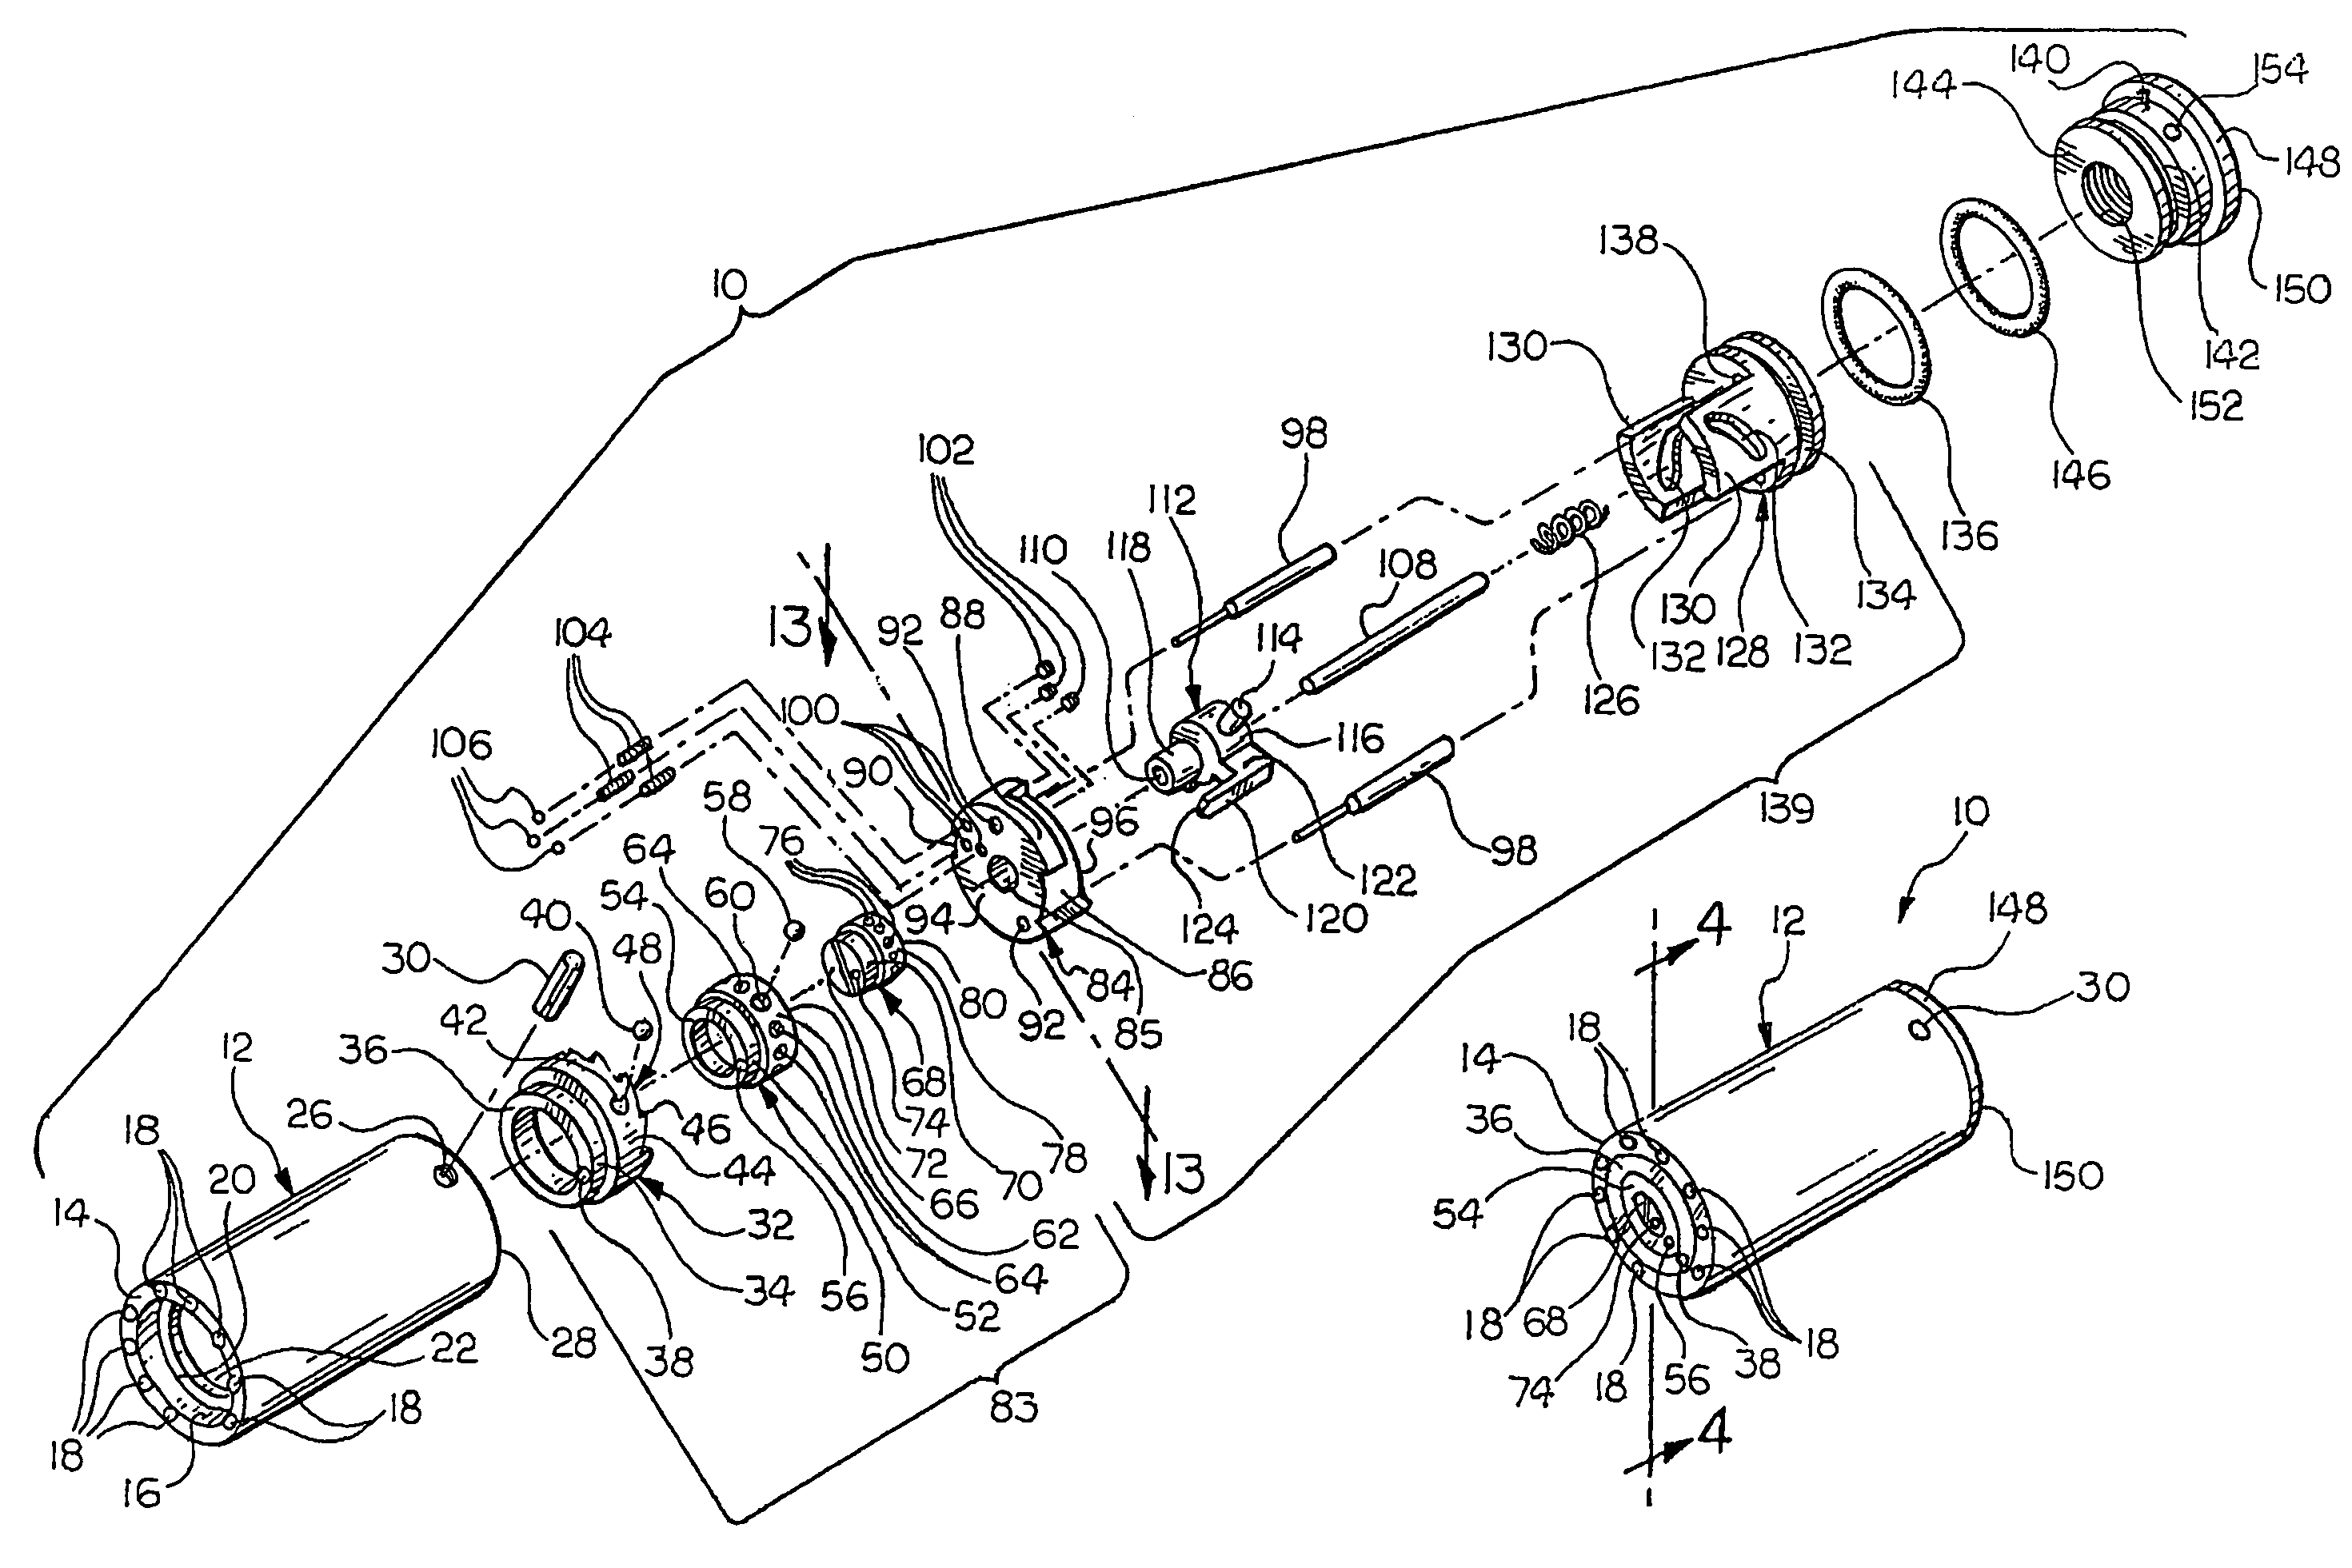 Numbering device for molded or cast parts